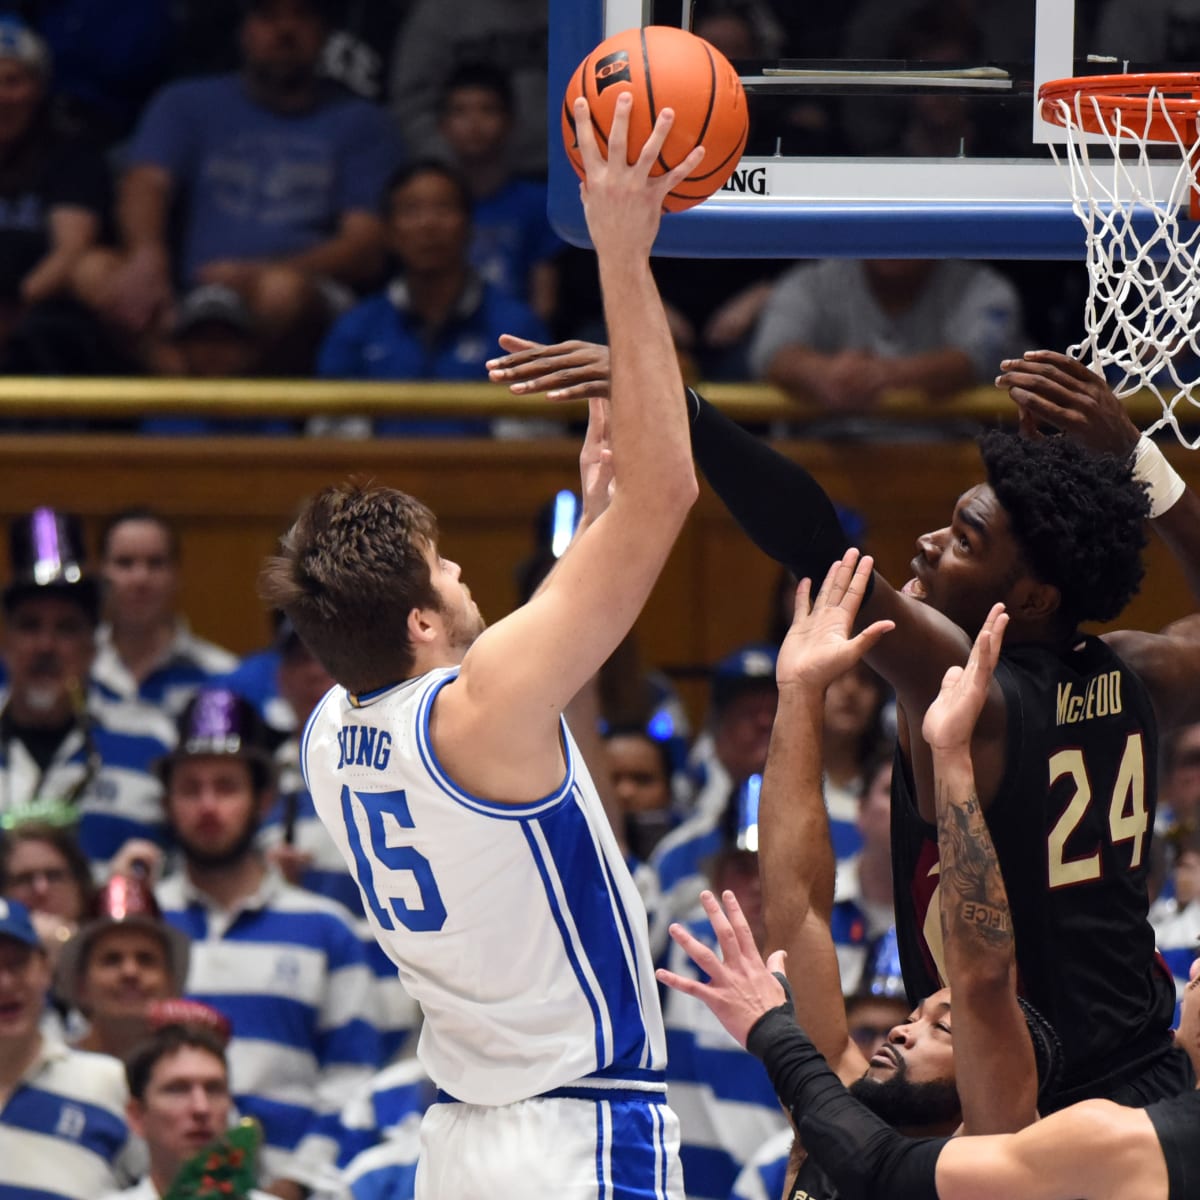 Duke basketball champ set to face brother in Texas - Sports Illustrated  Duke Blue Devils News, Analysis and More